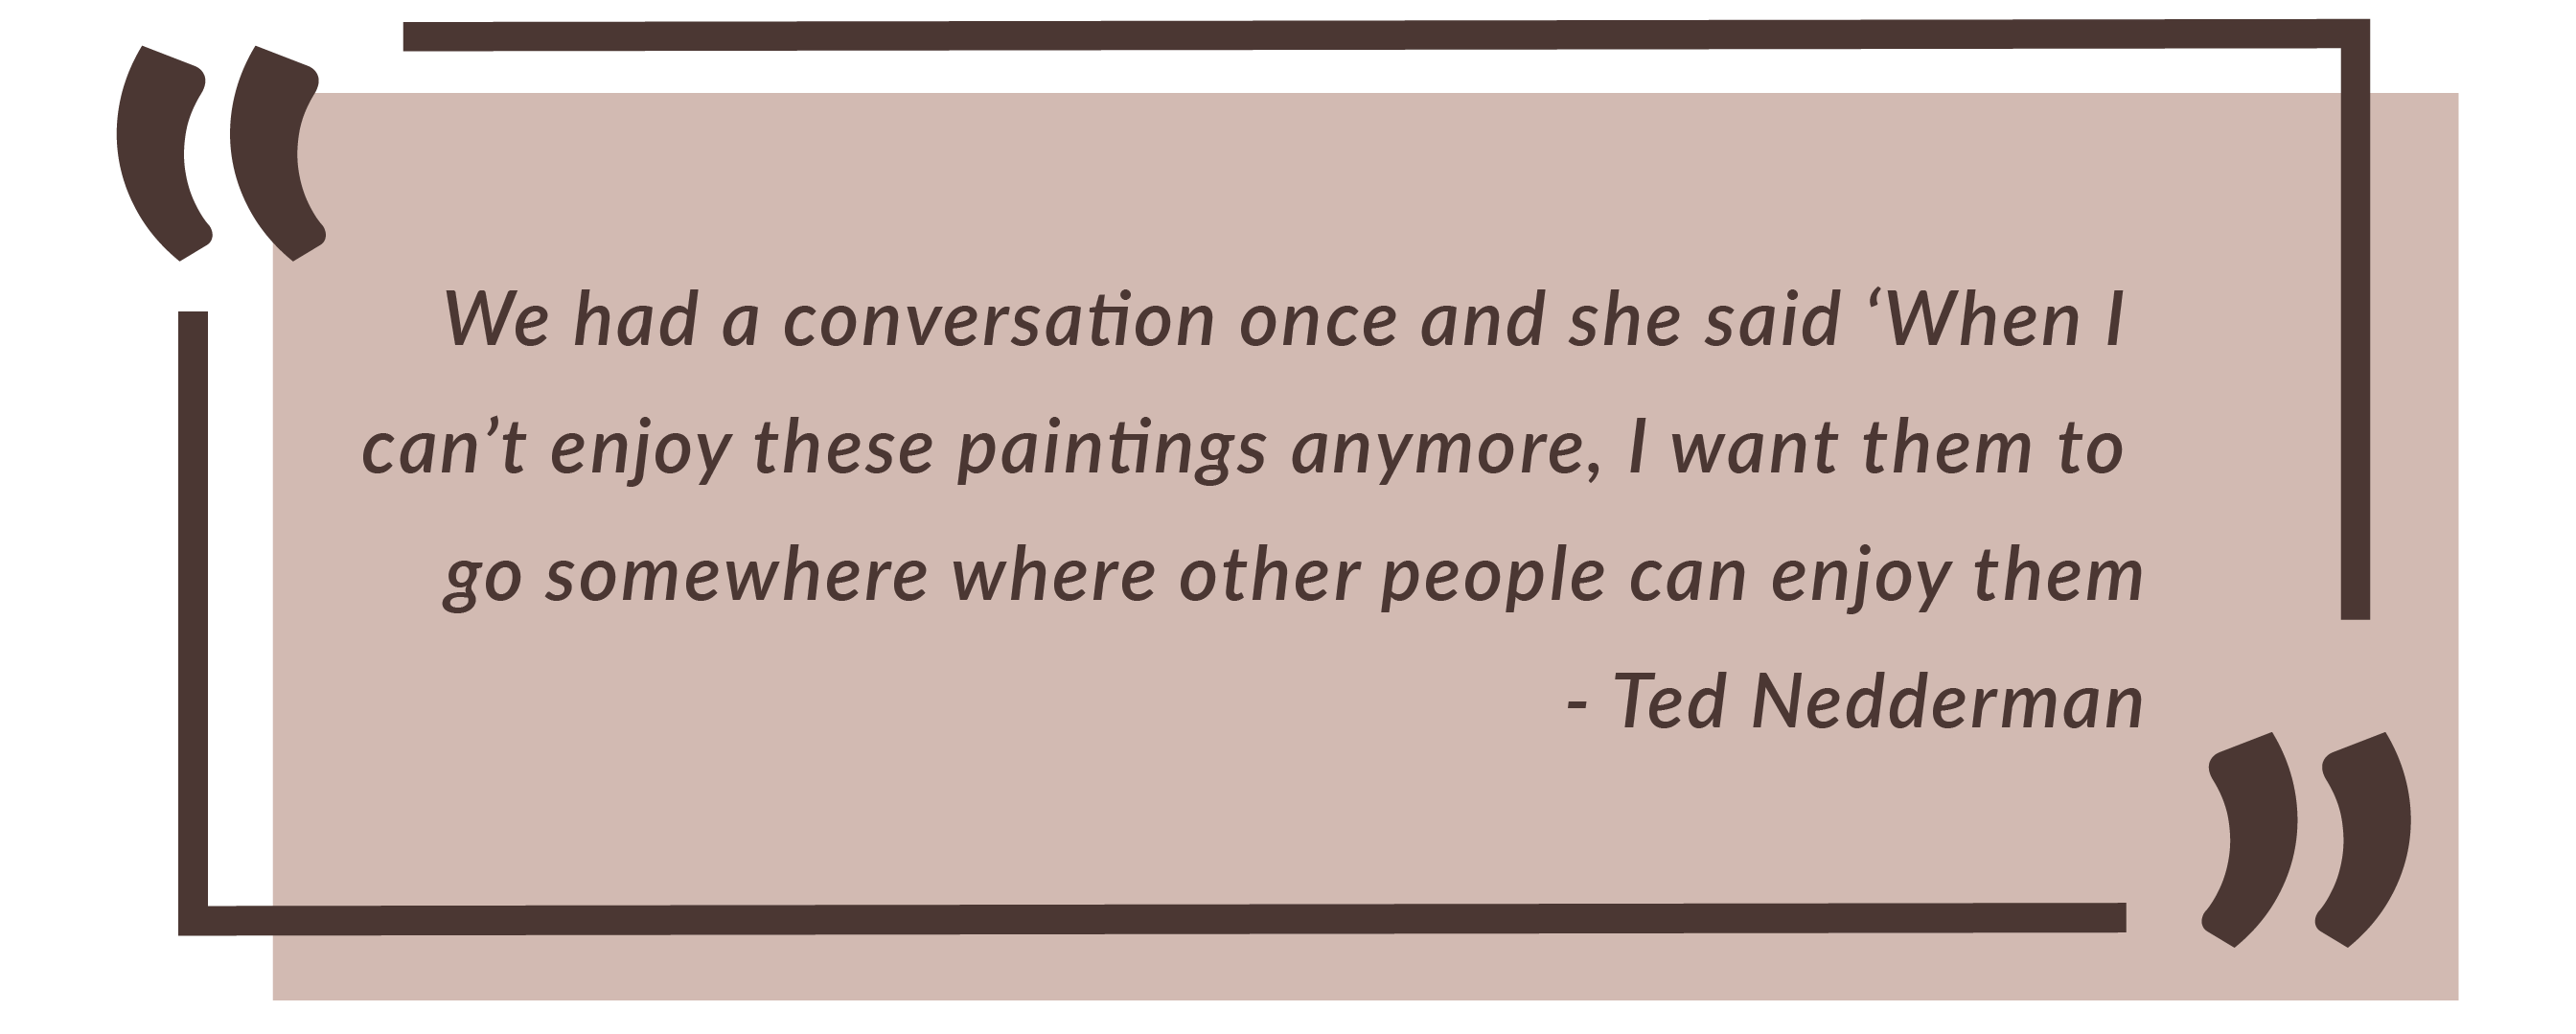 We had a conversation once and she said 'When I can't enjoy these paintings anymore, I want them to go somewhere where other people can ejoy them. -Ted Nedderman.